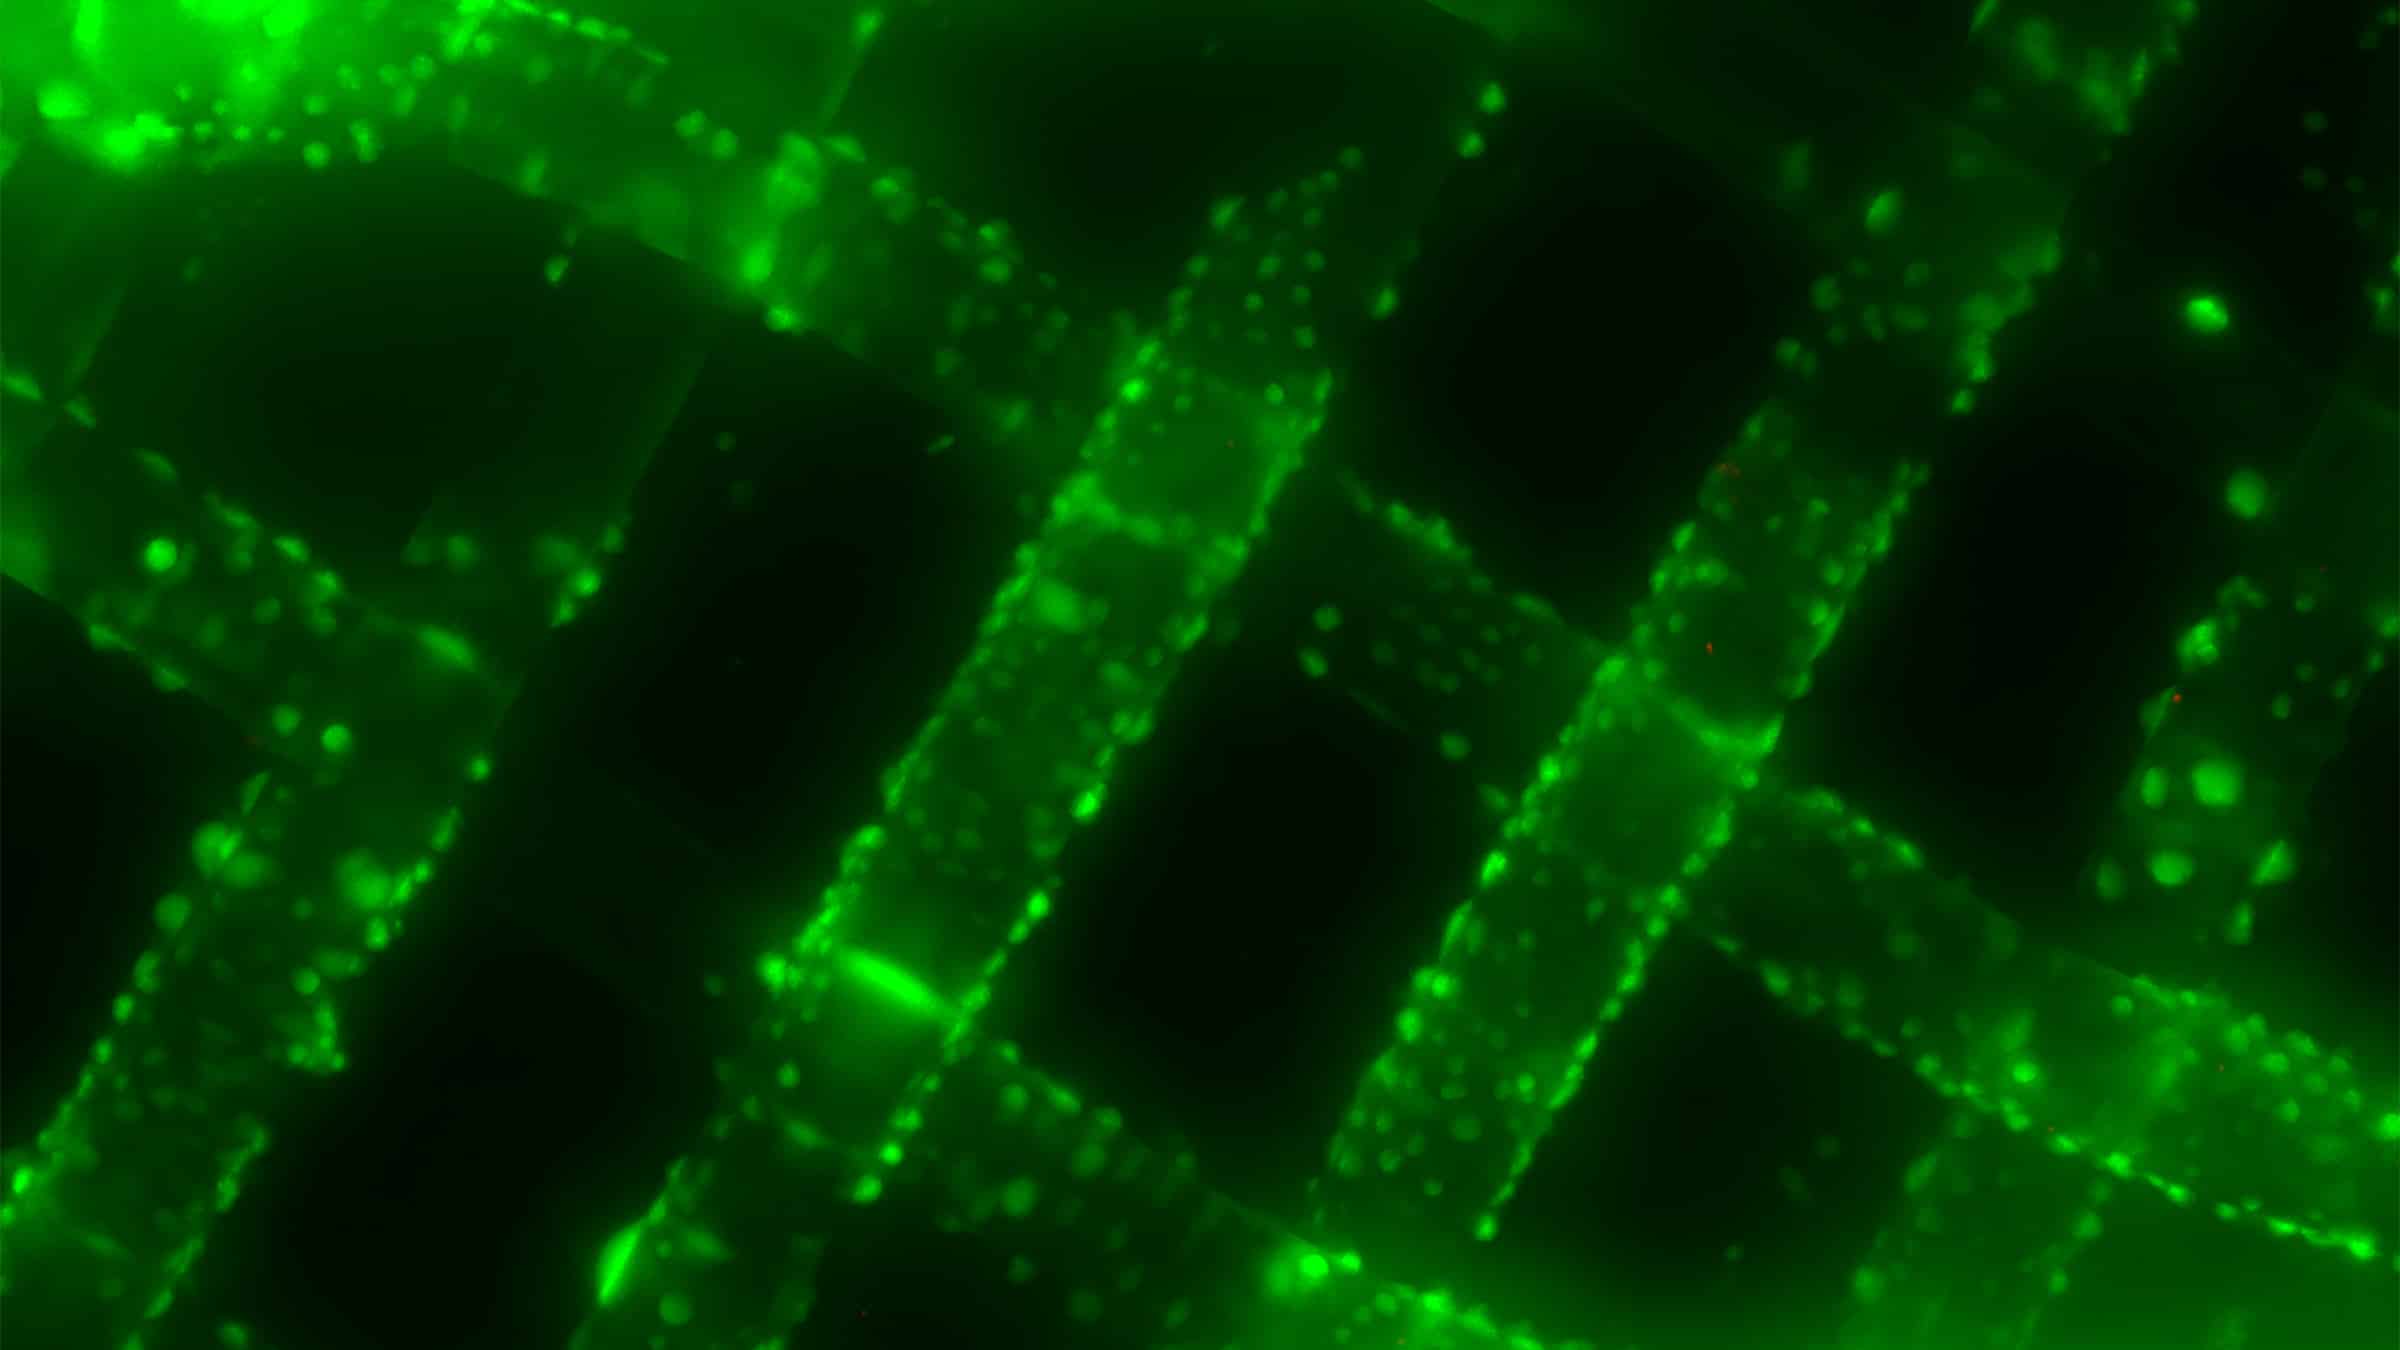 Microscopic view of fiber robot showing cross-stitch type pattern colored transluscent green on a black background.